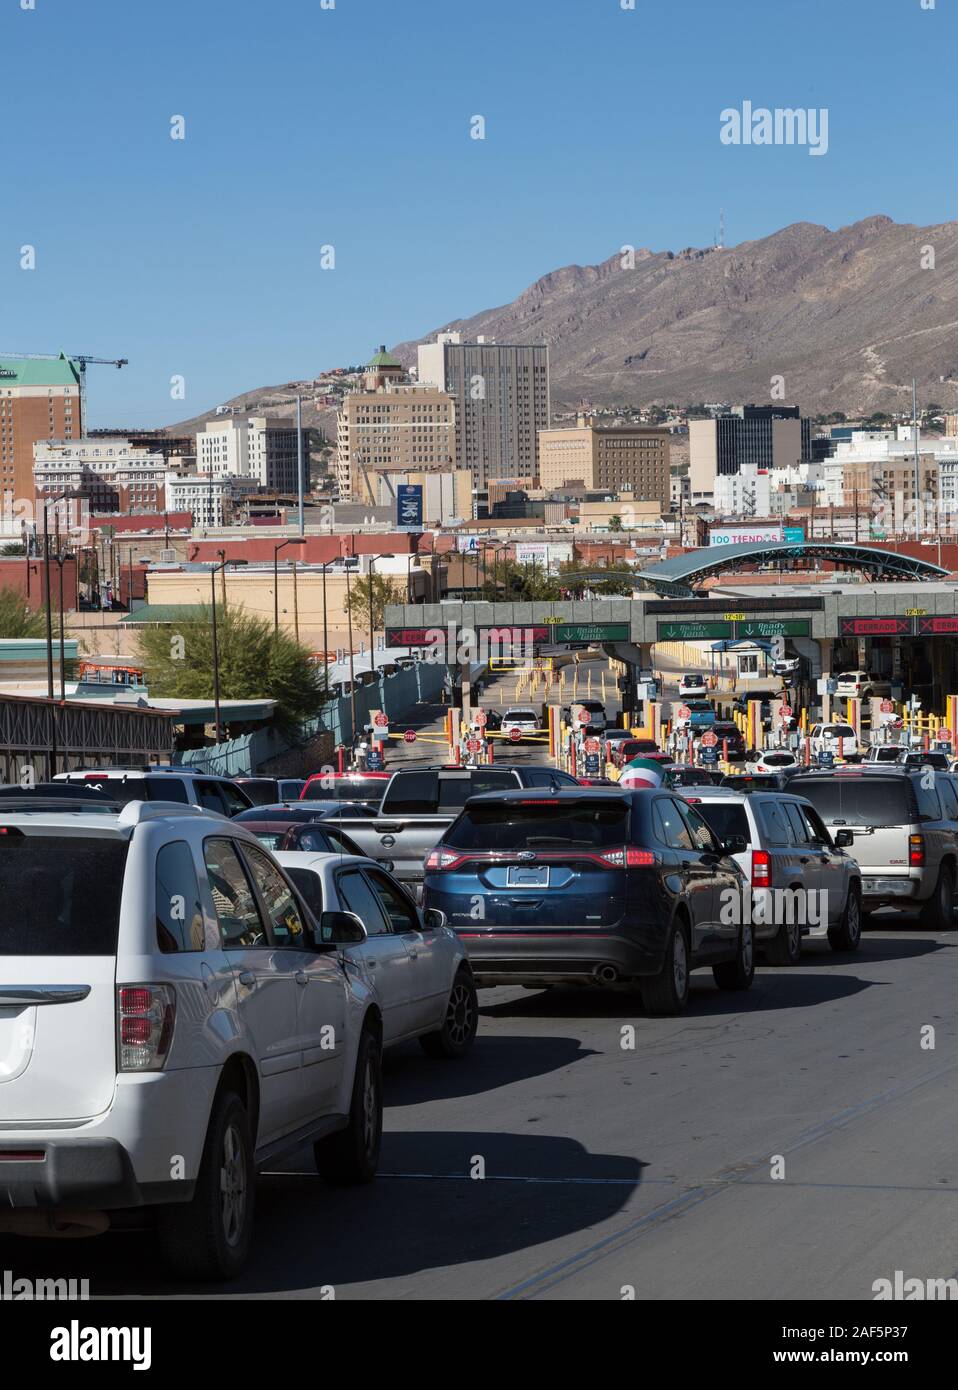 El Paso, Texas.  Automobiles Lined up to Enter the United States, Seen from Ciudad Juarez Side of the Border, Looking toward El Paso. Stock Photo